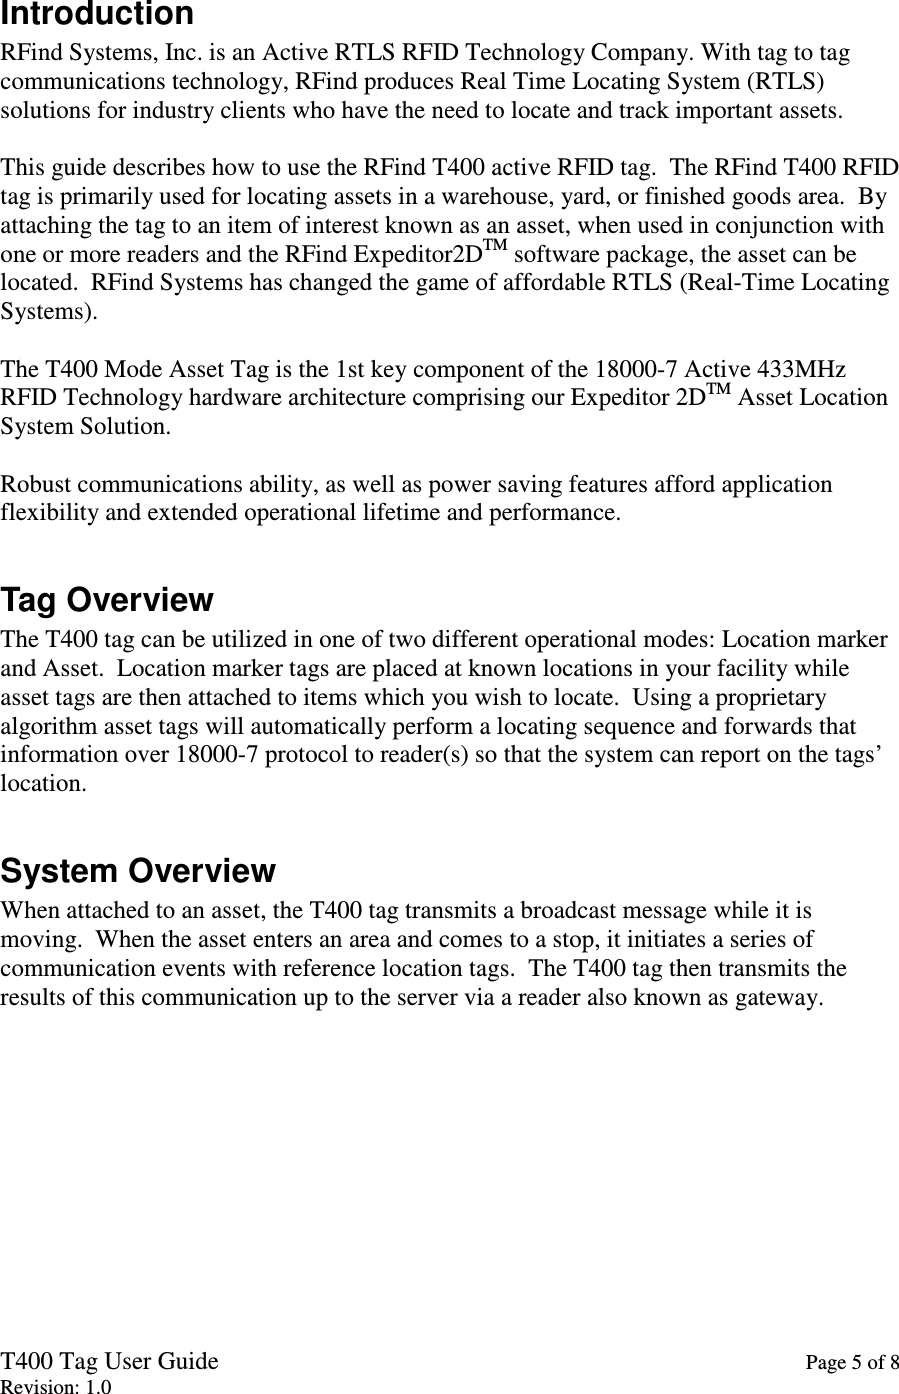 T400 Tag User Guide    Page 5 of 8 Revision: 1.0 Introduction RFind Systems, Inc. is an Active RTLS RFID Technology Company. With tag to tag communications technology, RFind produces Real Time Locating System (RTLS) solutions for industry clients who have the need to locate and track important assets.  This guide describes how to use the RFind T400 active RFID tag.  The RFind T400 RFID tag is primarily used for locating assets in a warehouse, yard, or finished goods area.  By attaching the tag to an item of interest known as an asset, when used in conjunction with one or more readers and the RFind Expeditor2DTM software package, the asset can be located.  RFind Systems has changed the game of affordable RTLS (Real-Time Locating Systems).  The T400 Mode Asset Tag is the 1st key component of the 18000-7 Active 433MHz RFID Technology hardware architecture comprising our Expeditor 2DTM Asset Location System Solution.  Robust communications ability, as well as power saving features afford application flexibility and extended operational lifetime and performance.  Tag Overview The T400 tag can be utilized in one of two different operational modes: Location marker and Asset.  Location marker tags are placed at known locations in your facility while asset tags are then attached to items which you wish to locate.  Using a proprietary algorithm asset tags will automatically perform a locating sequence and forwards that information over 18000-7 protocol to reader(s) so that the system can report on the tags’ location.  System Overview When attached to an asset, the T400 tag transmits a broadcast message while it is moving.  When the asset enters an area and comes to a stop, it initiates a series of communication events with reference location tags.  The T400 tag then transmits the results of this communication up to the server via a reader also known as gateway.  